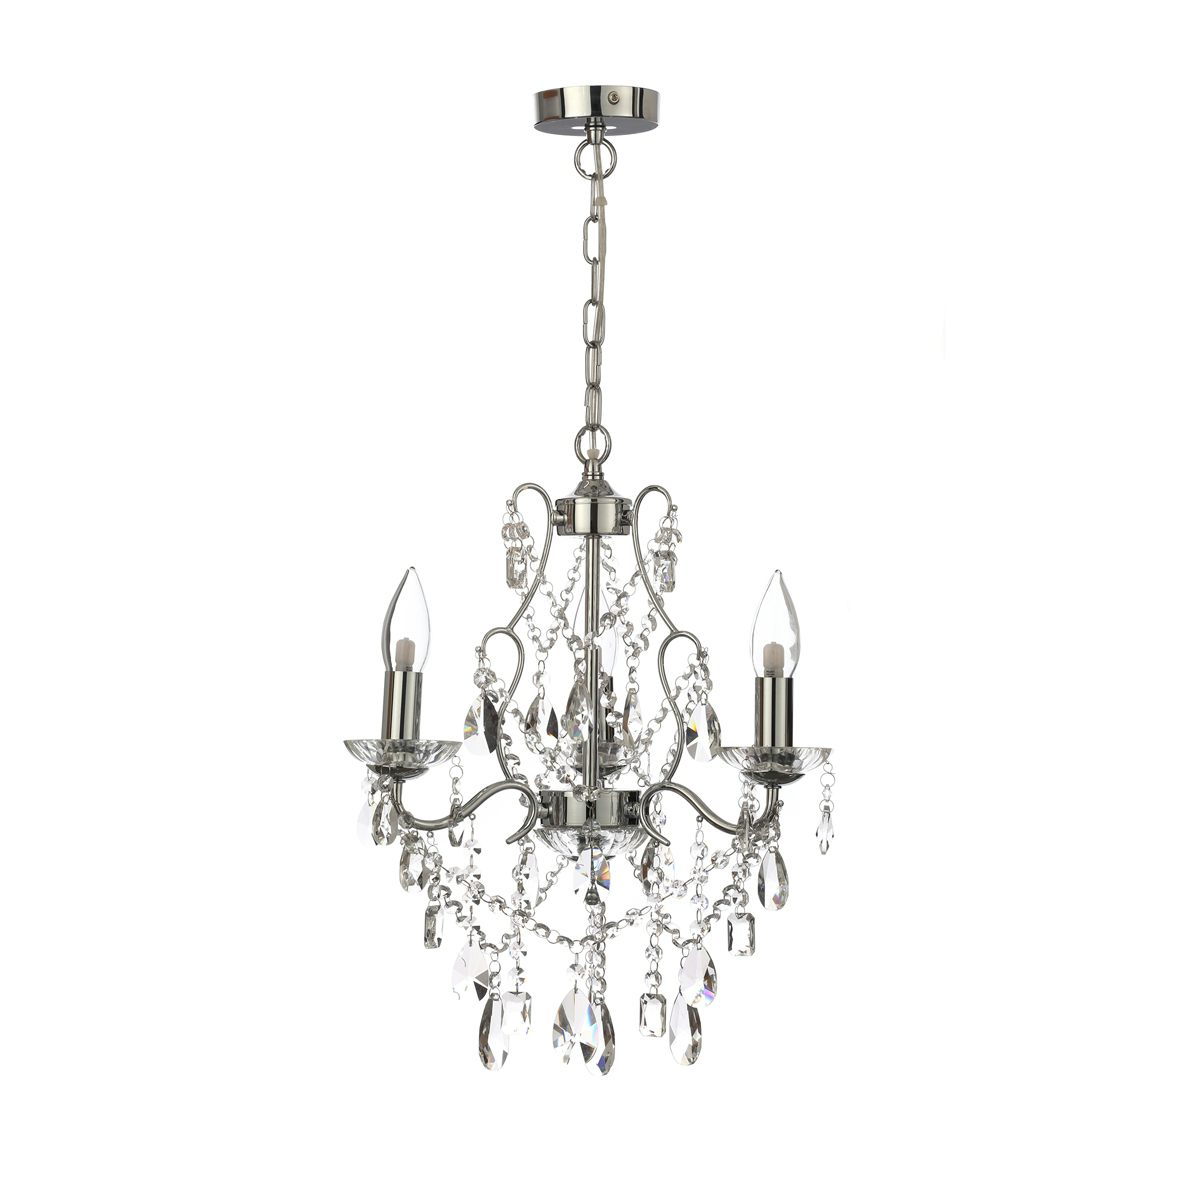 Marquis by Waterford Annalee 3 light bathroom chandelier